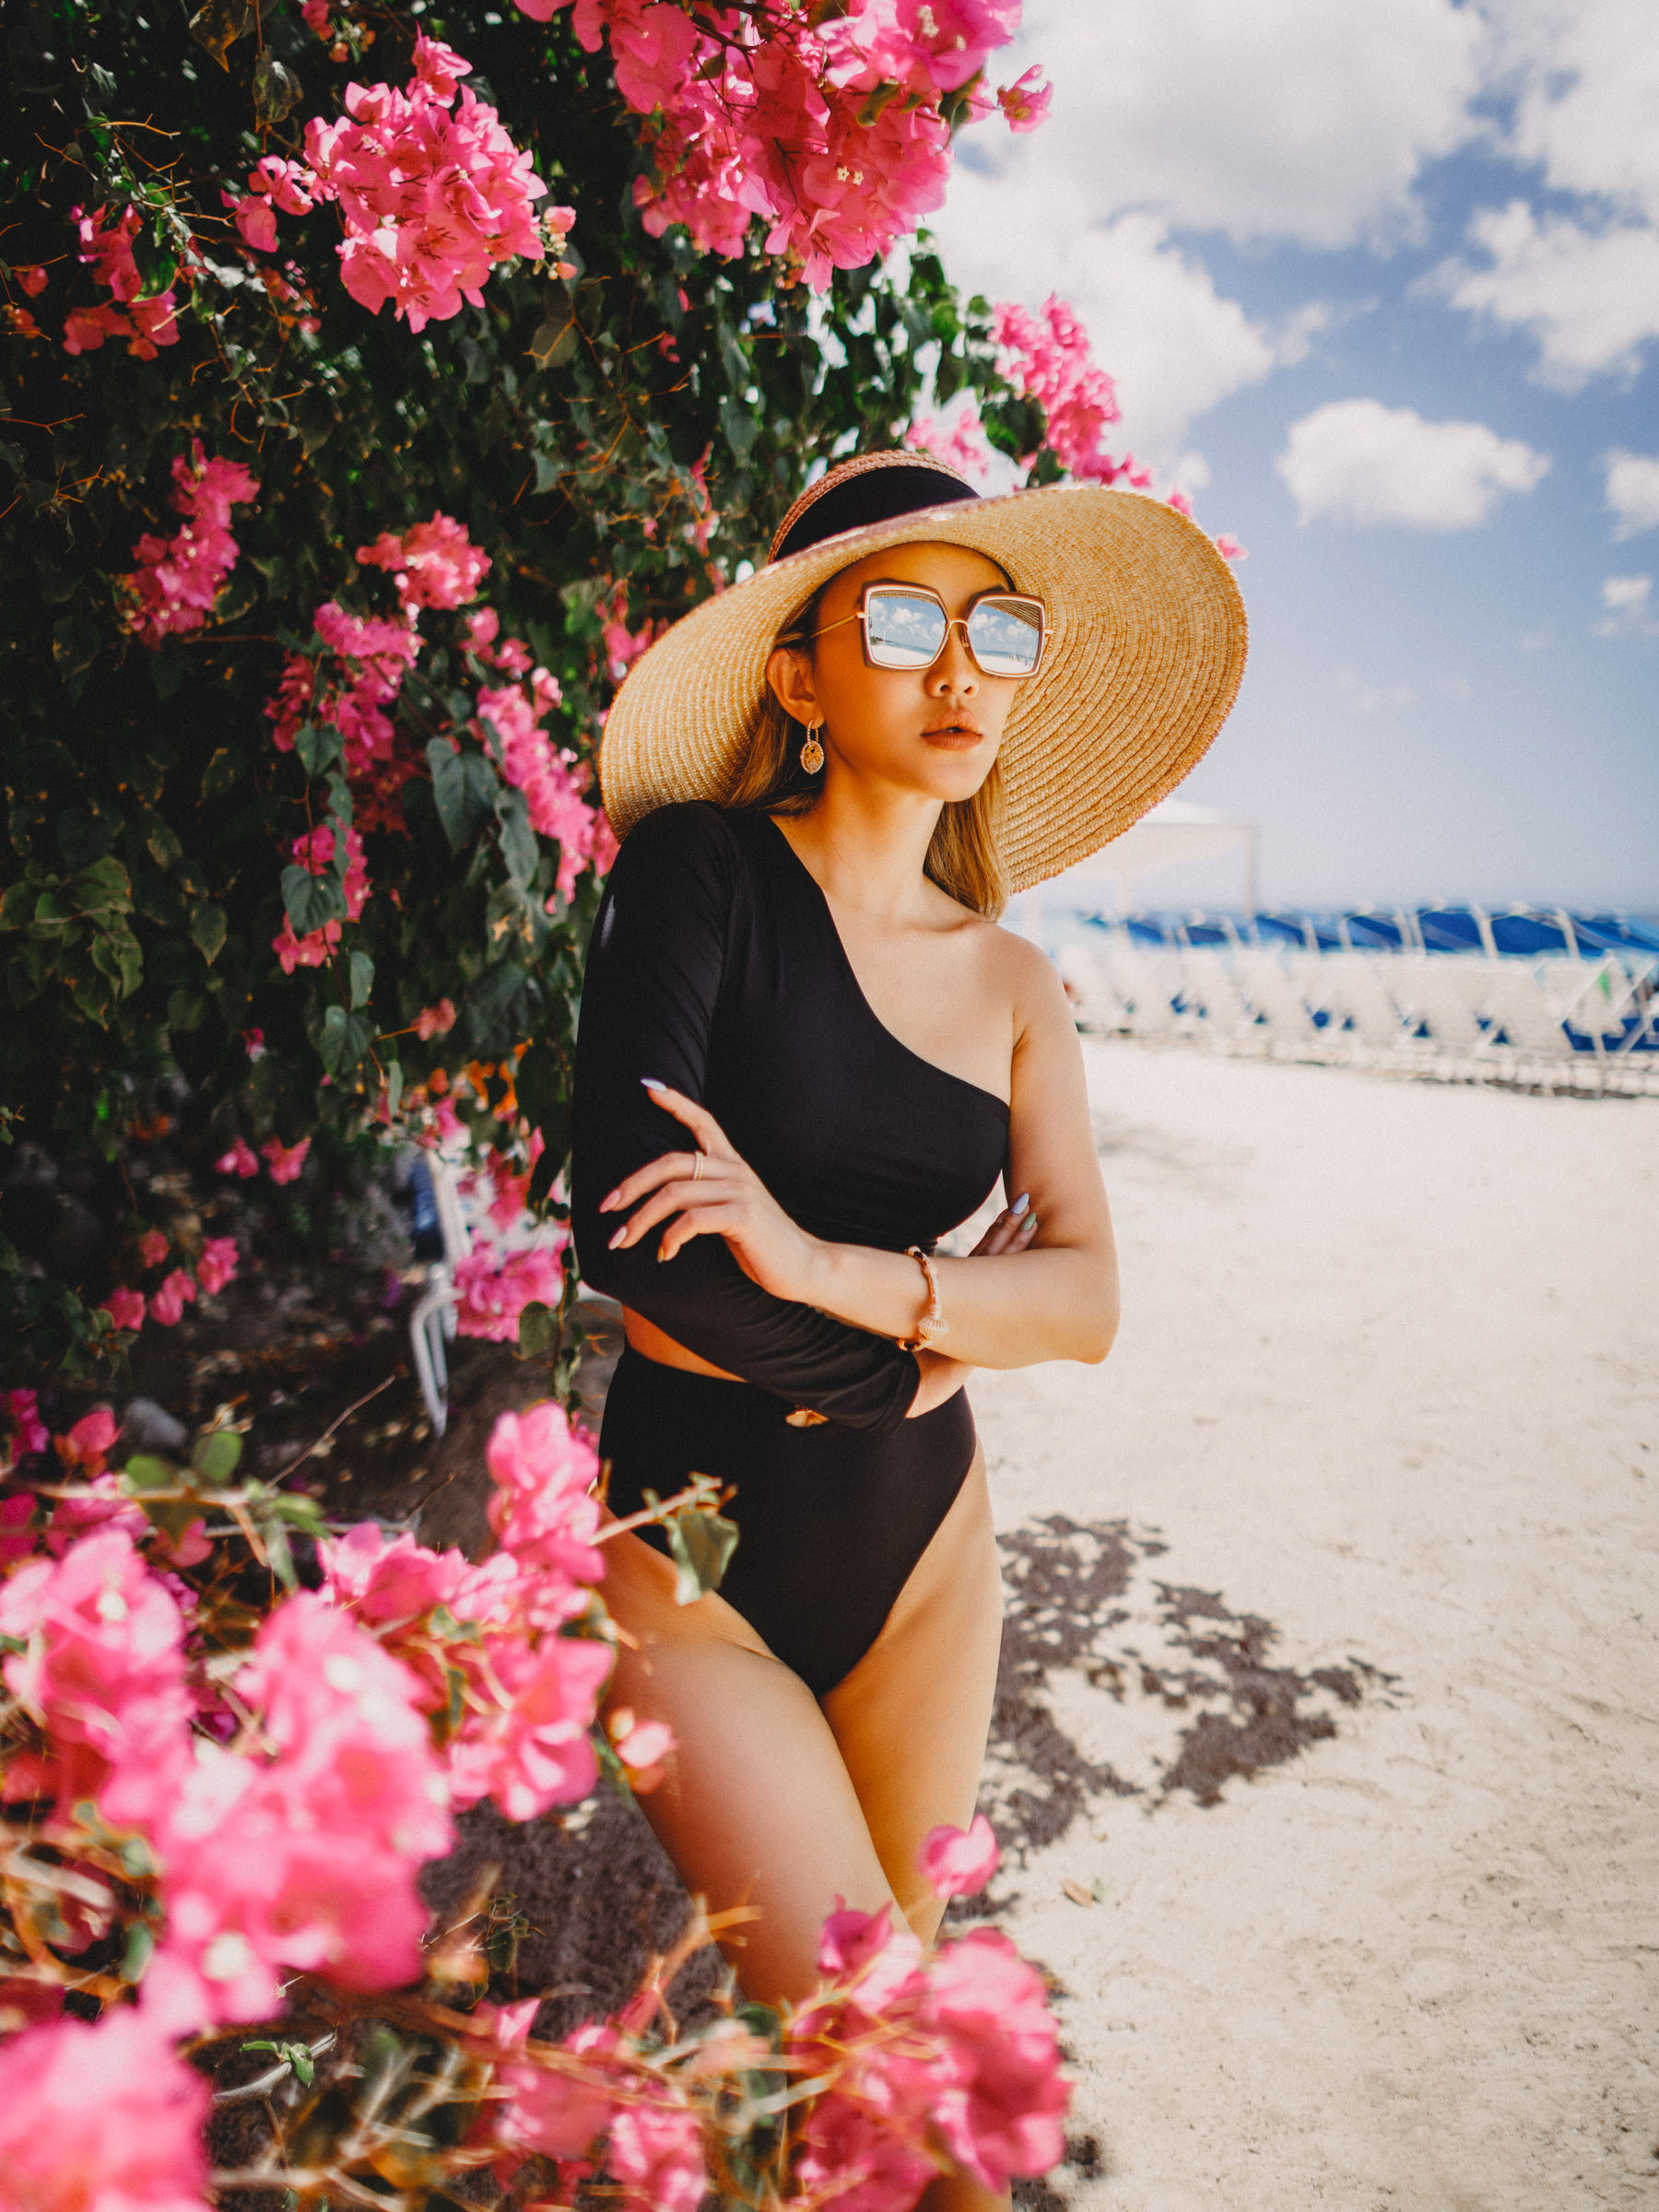 must-have swimsuits, swimwear trends summer 2019 // Notjessfashion.com